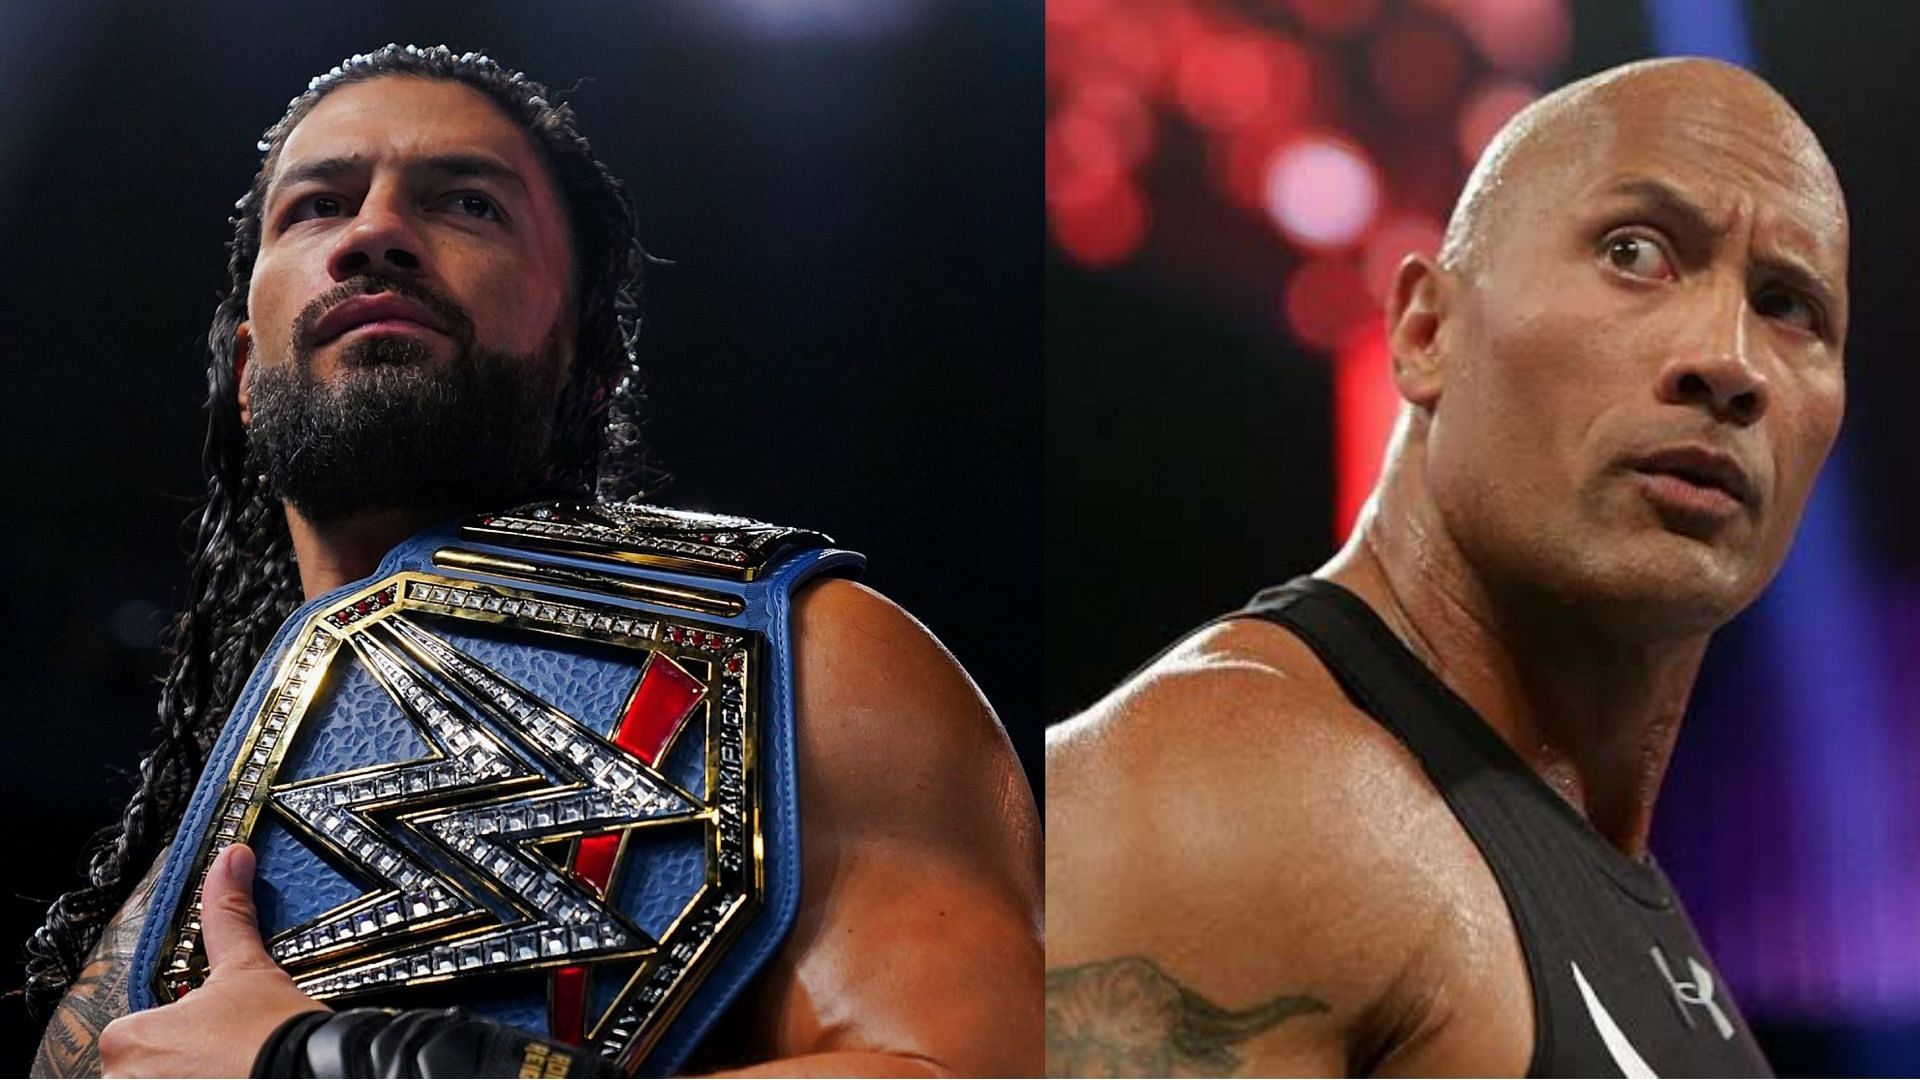 Will the cousins face off at WrestleMania 39?